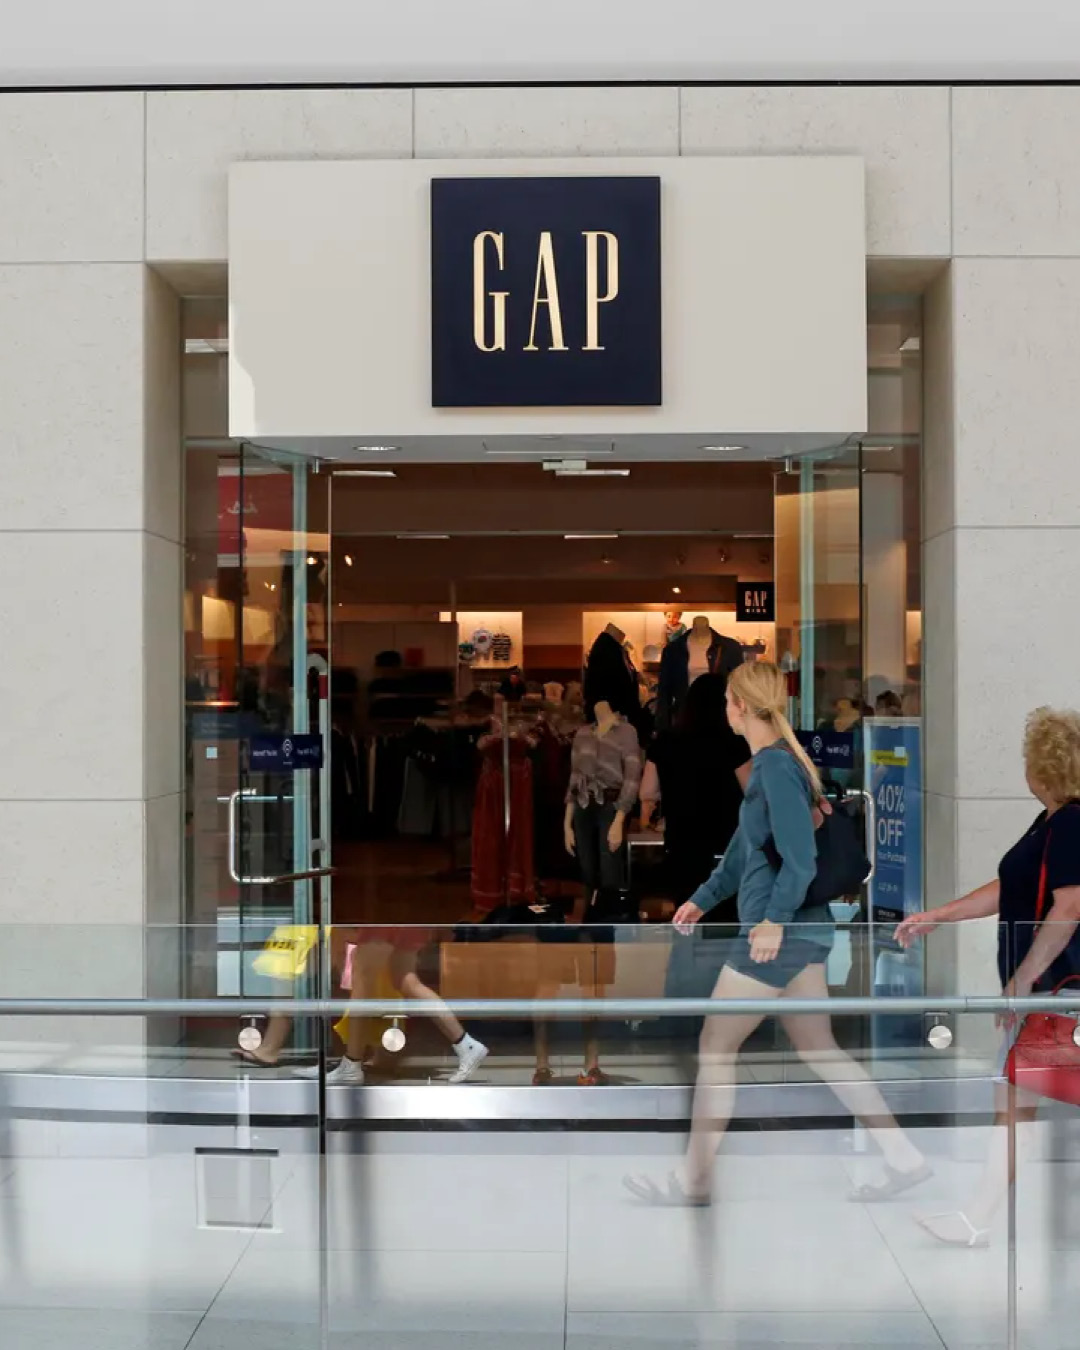 Coach Files Trademark Lawsuit Against Gap Over 'Coach' T-Shirts